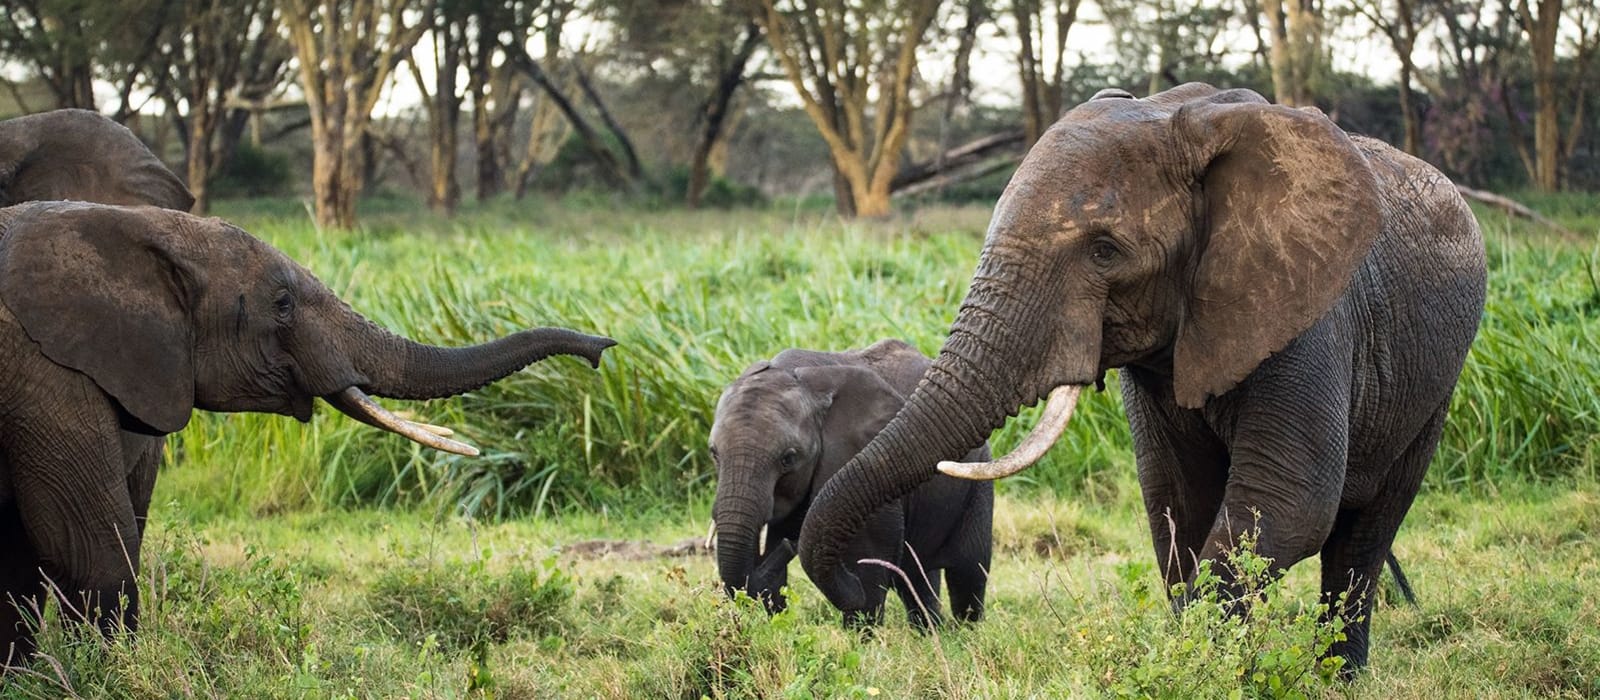 Elephants &amp; Sustainable Agriculture in Kenya